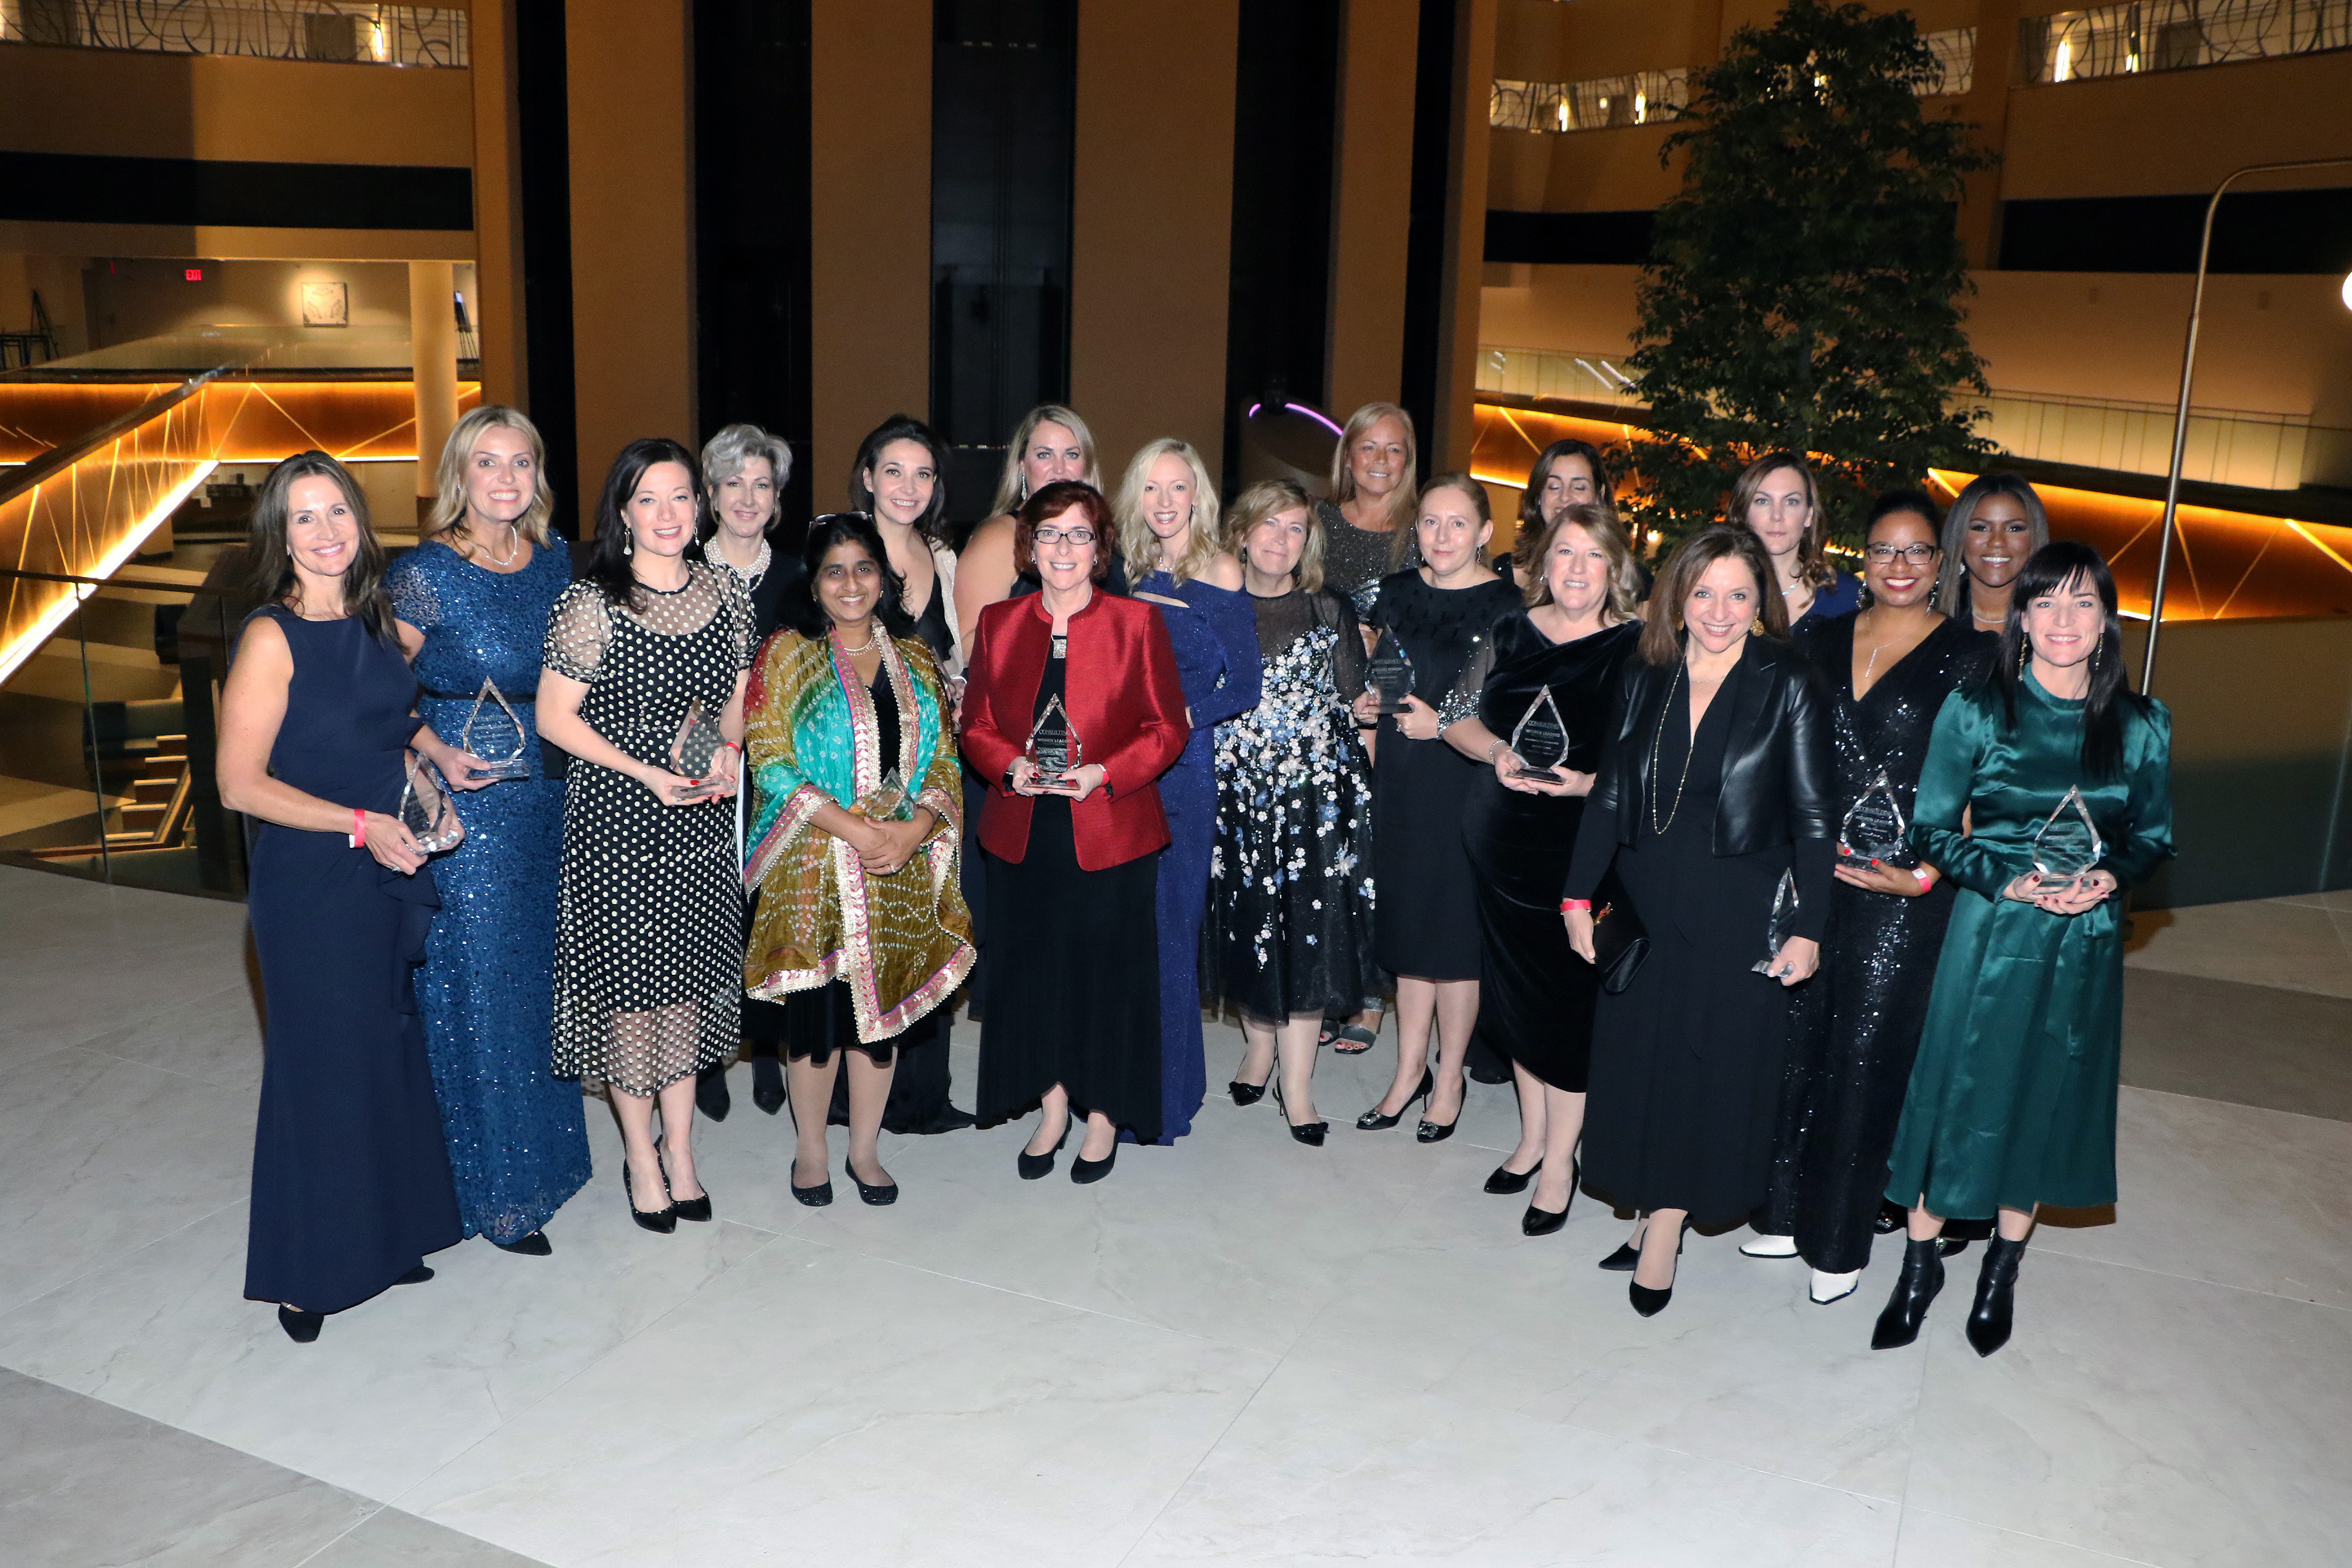 Award Event Photos! 2021 Women Leaders in Consulting